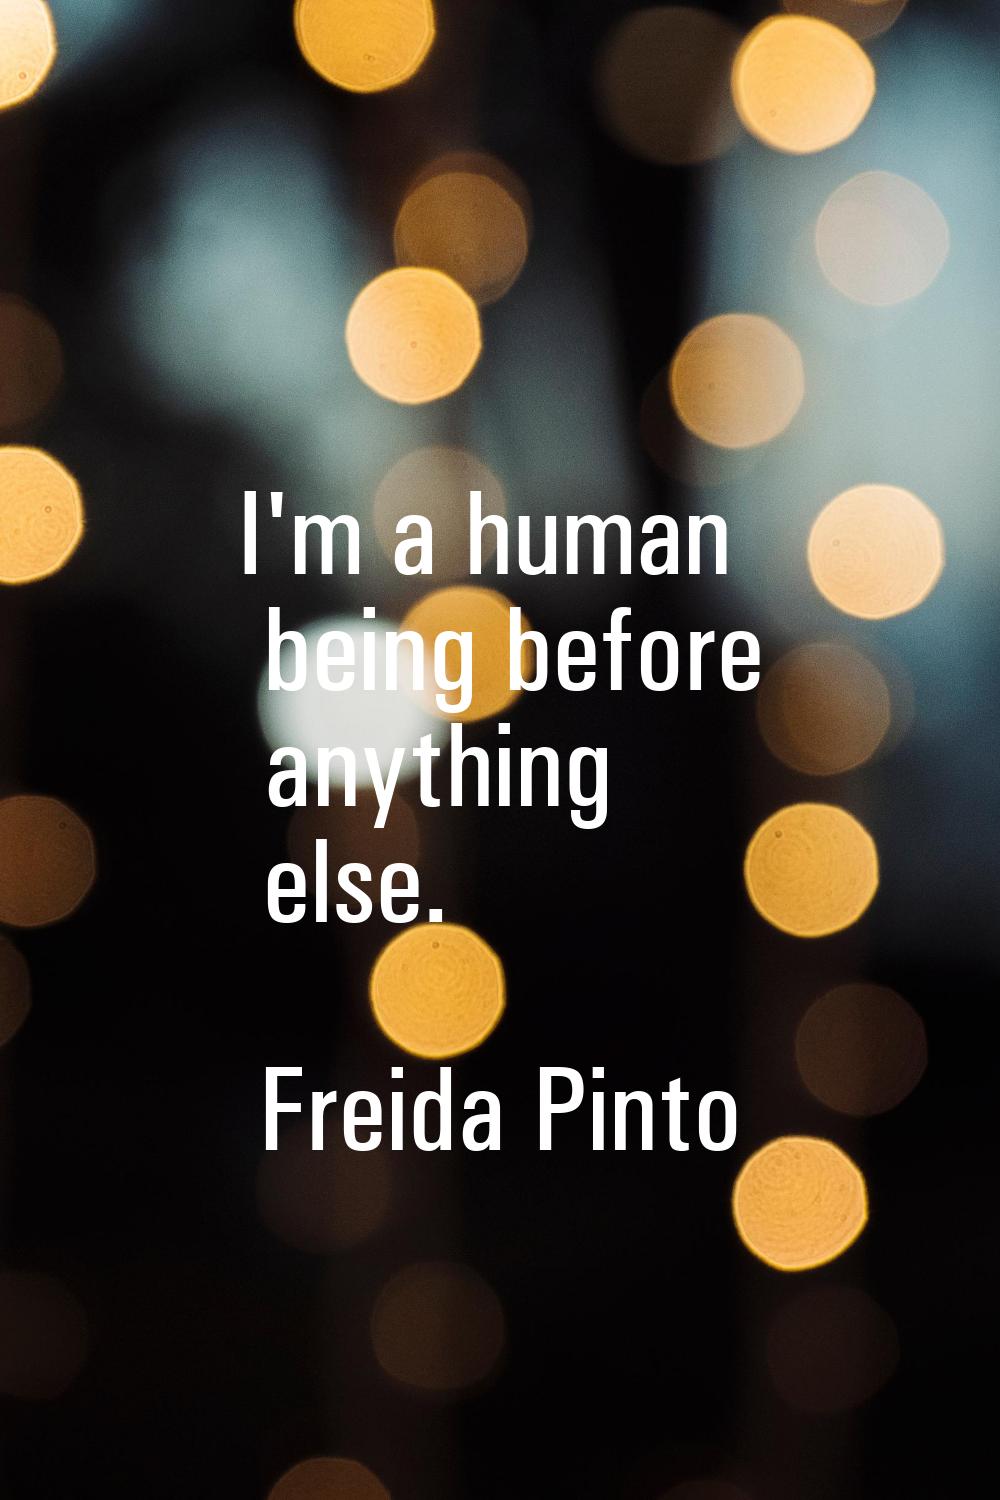 I'm a human being before anything else.